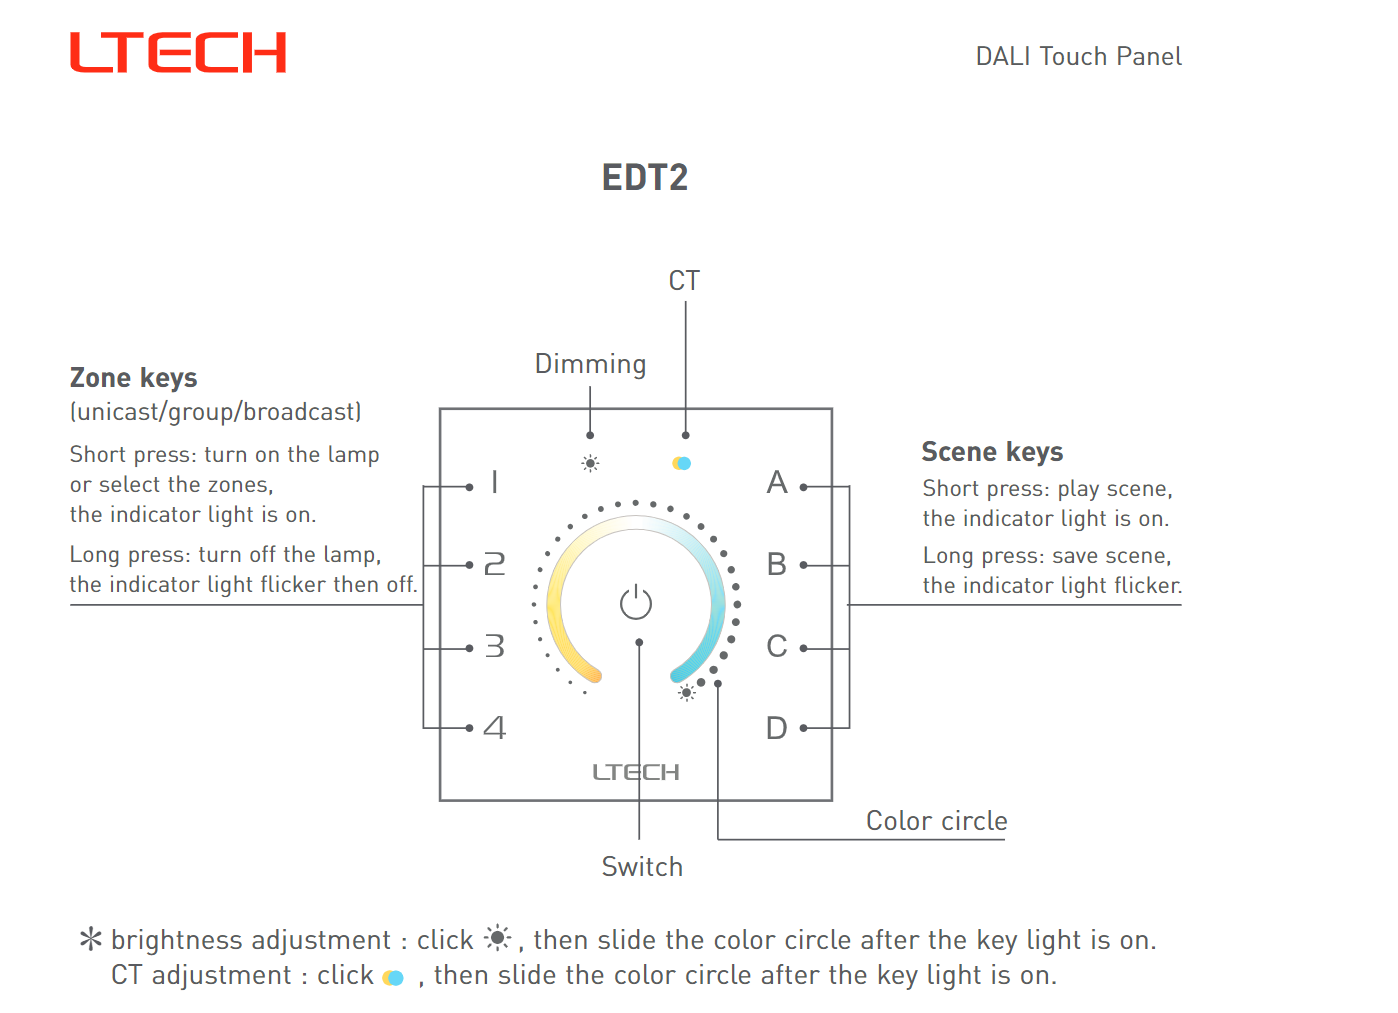 Ltech_EDT2_DALI_CT_Touch_Panel_Master_Led_Controller_7